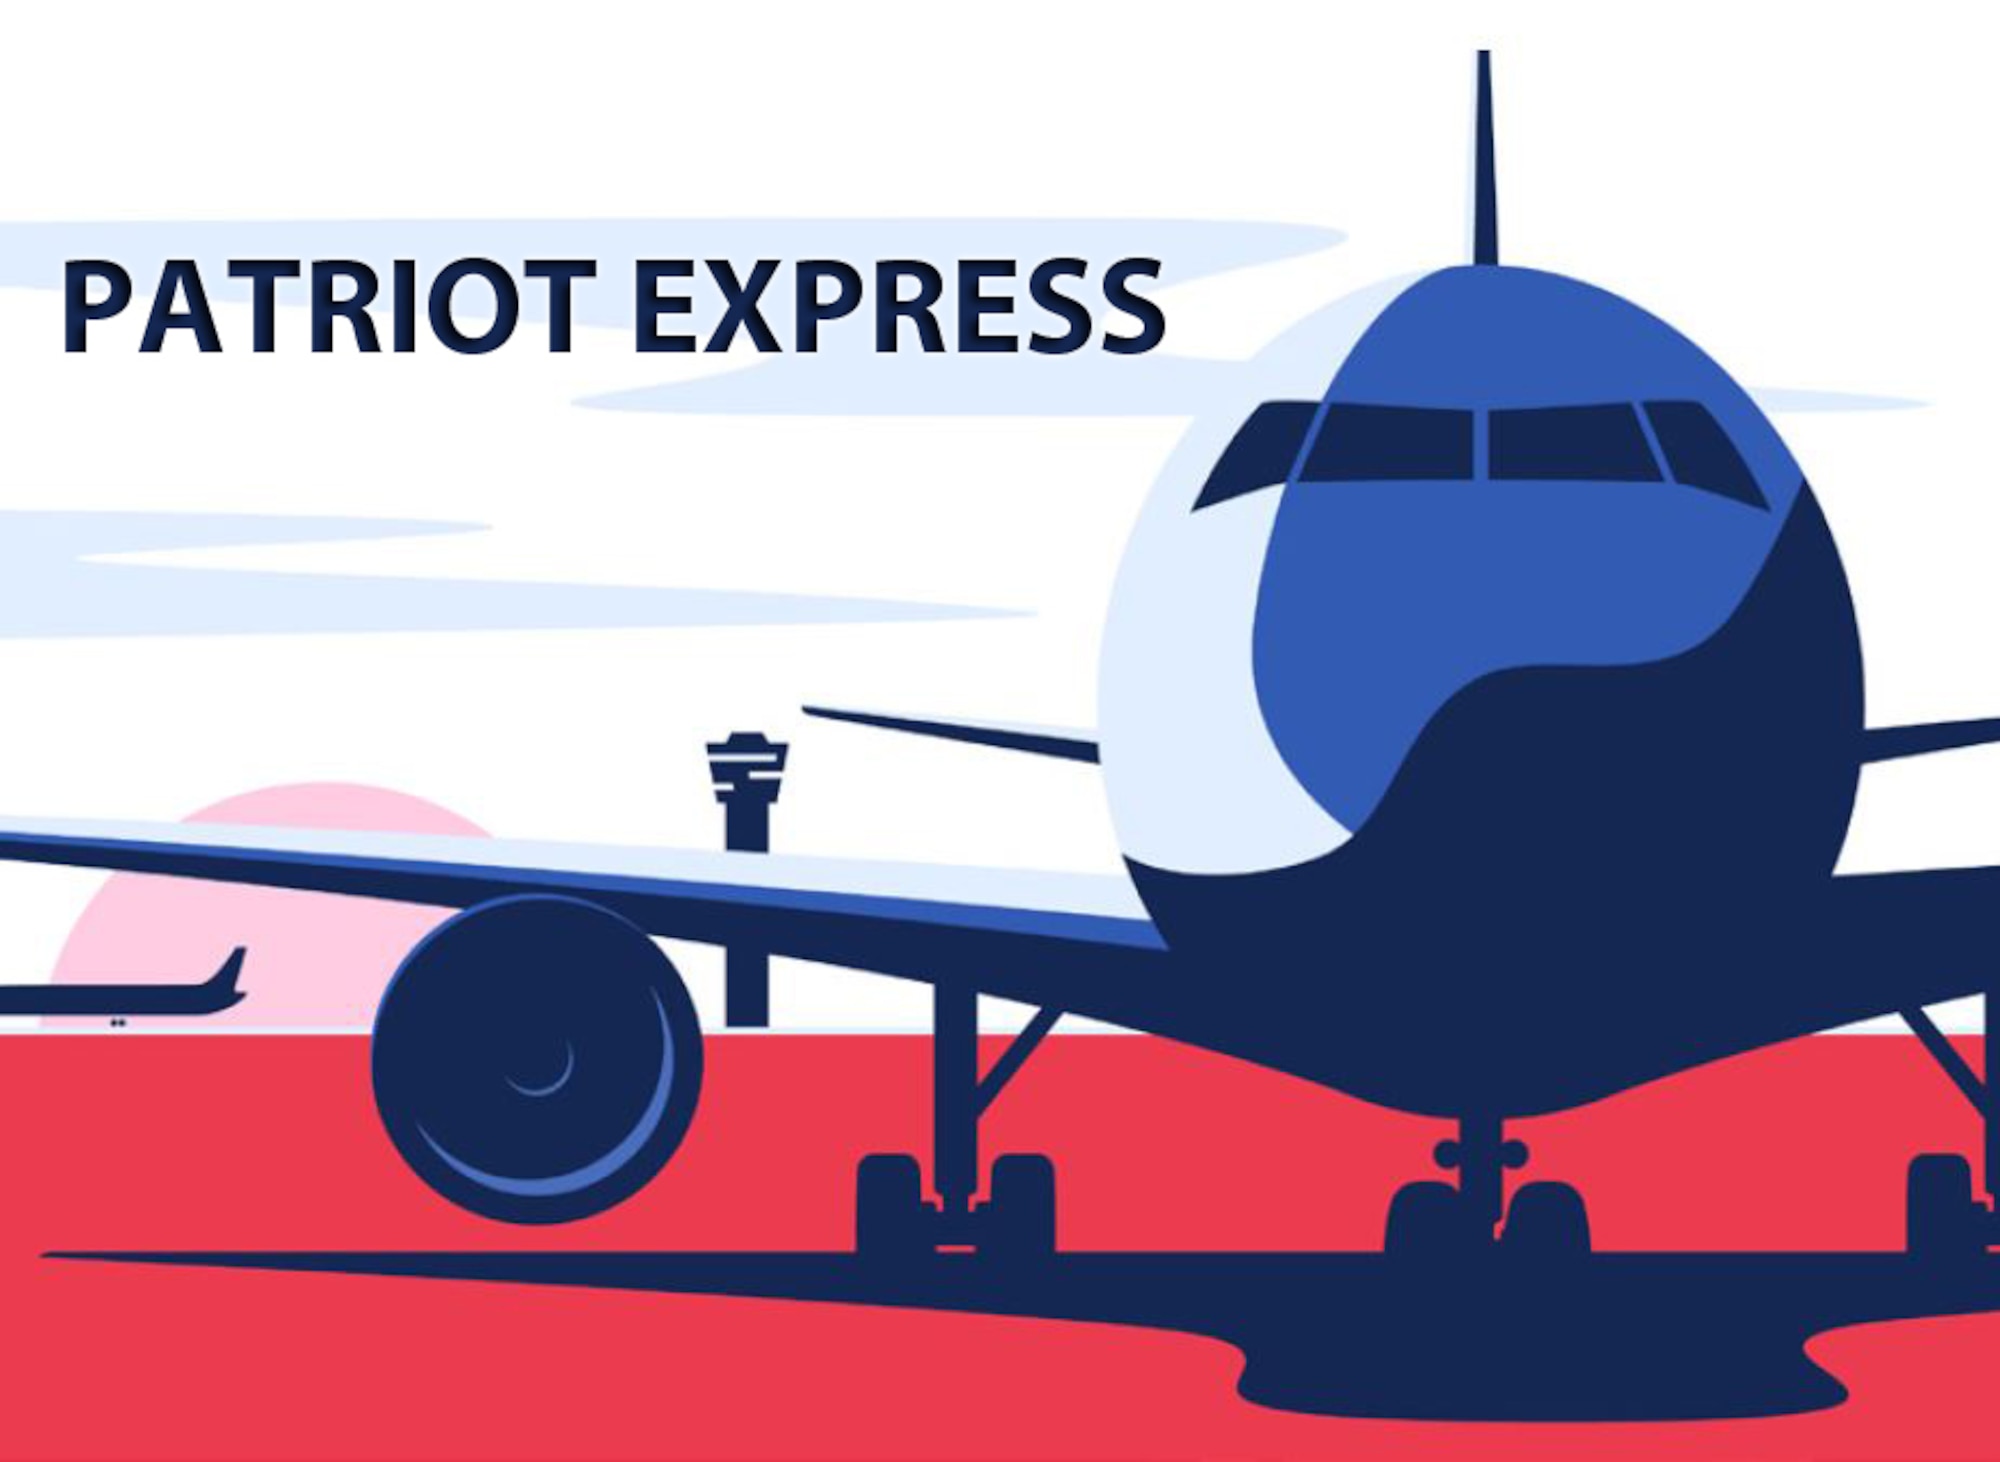 To mitigate the spread of COVID-19 and to meet long-standing commitments to U.S. allies and partners, the Department of Defense began rapid, on-site COVID-19 testing for passengers departing Baltimore Washington International Airport and Seattle Tacoma Airport aboard Patriot Express flights for official duty at overseas locations. (U.S. Air Force graphic by Master Sgt. Richard P. Ebensberger)